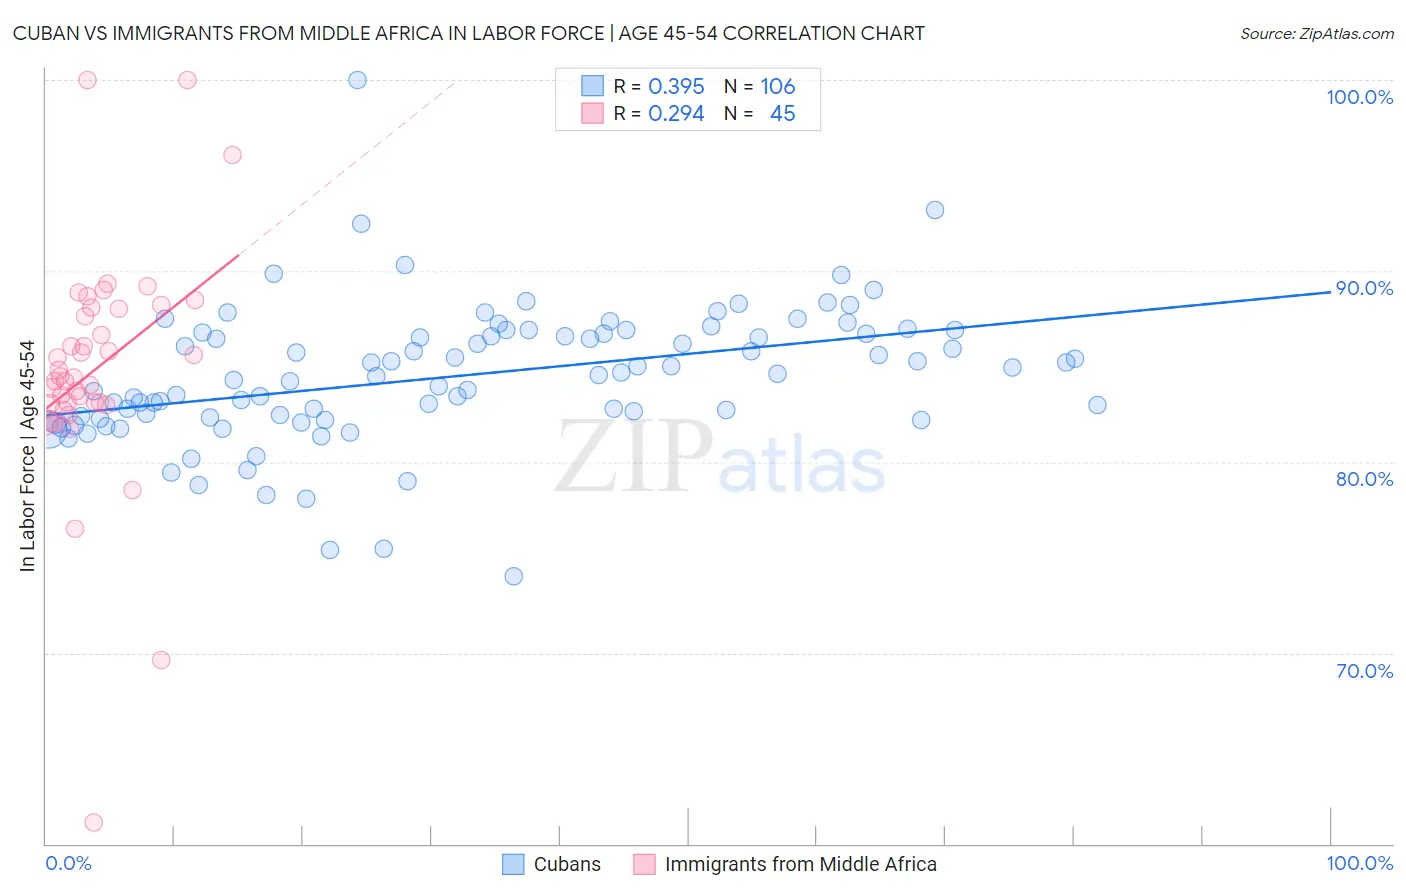 Cuban vs Immigrants from Middle Africa In Labor Force | Age 45-54